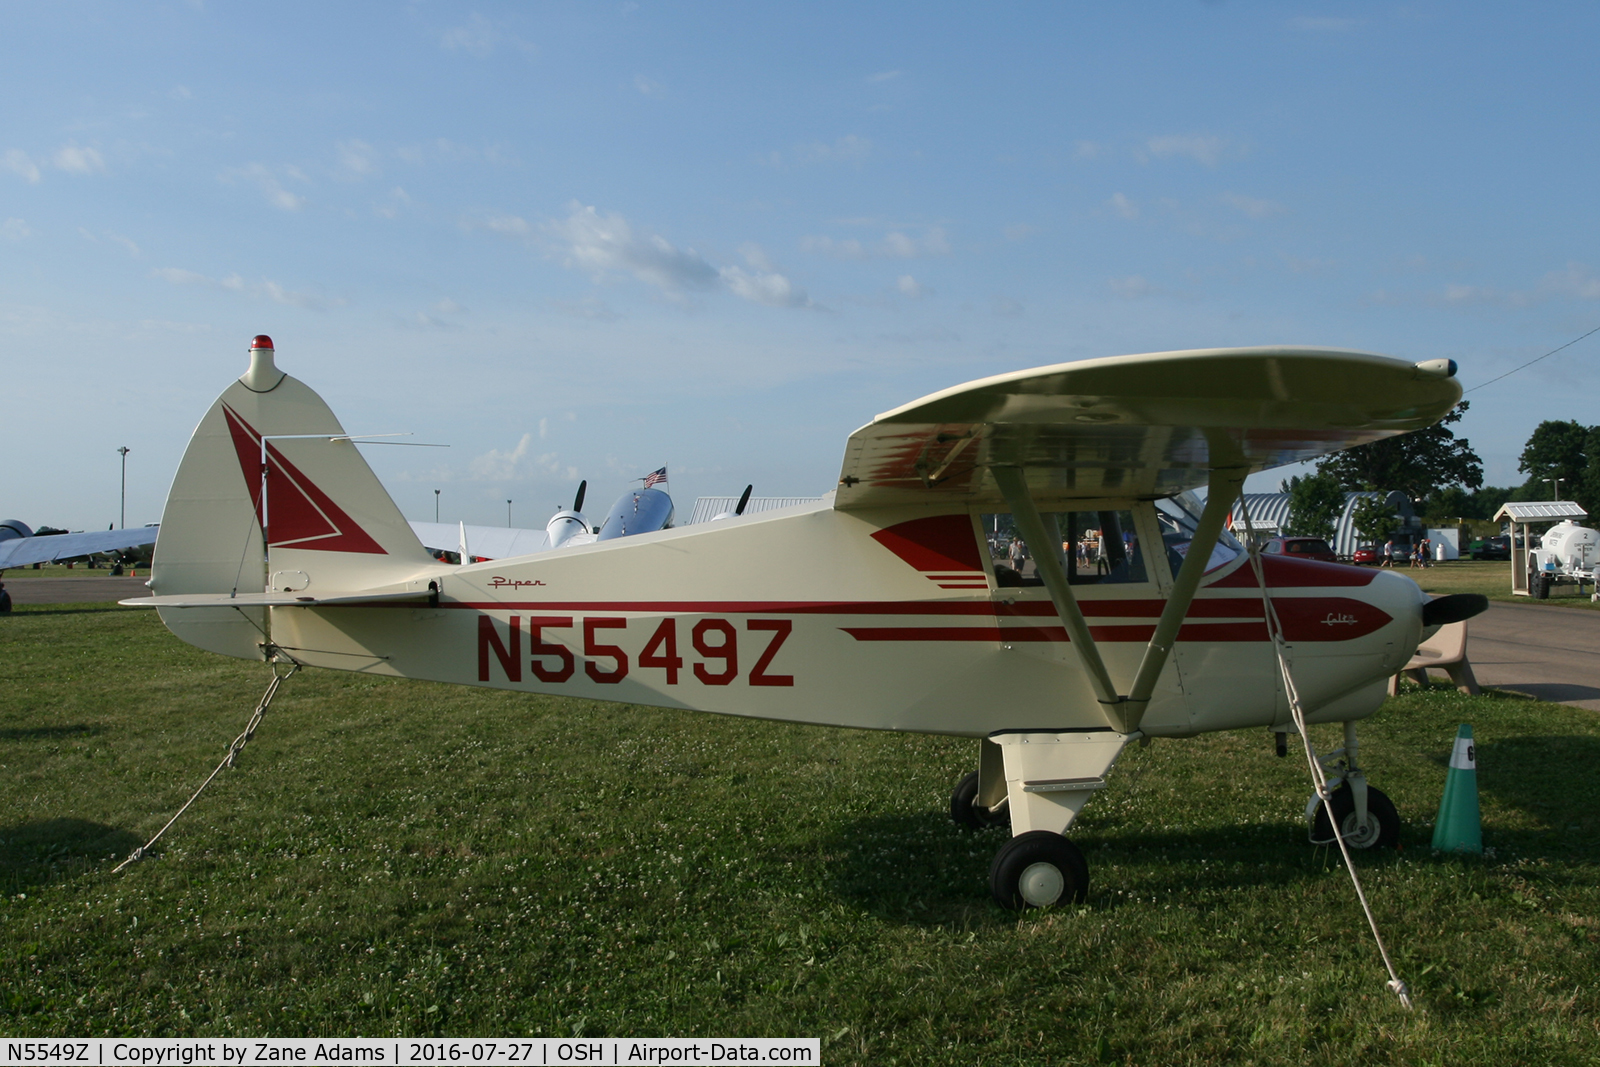 N5549Z, 1962 Piper PA-22-108 Colt Colt C/N 22-9341, At the 2016 EAA AirVenture - Oshkosh, Wisconsin